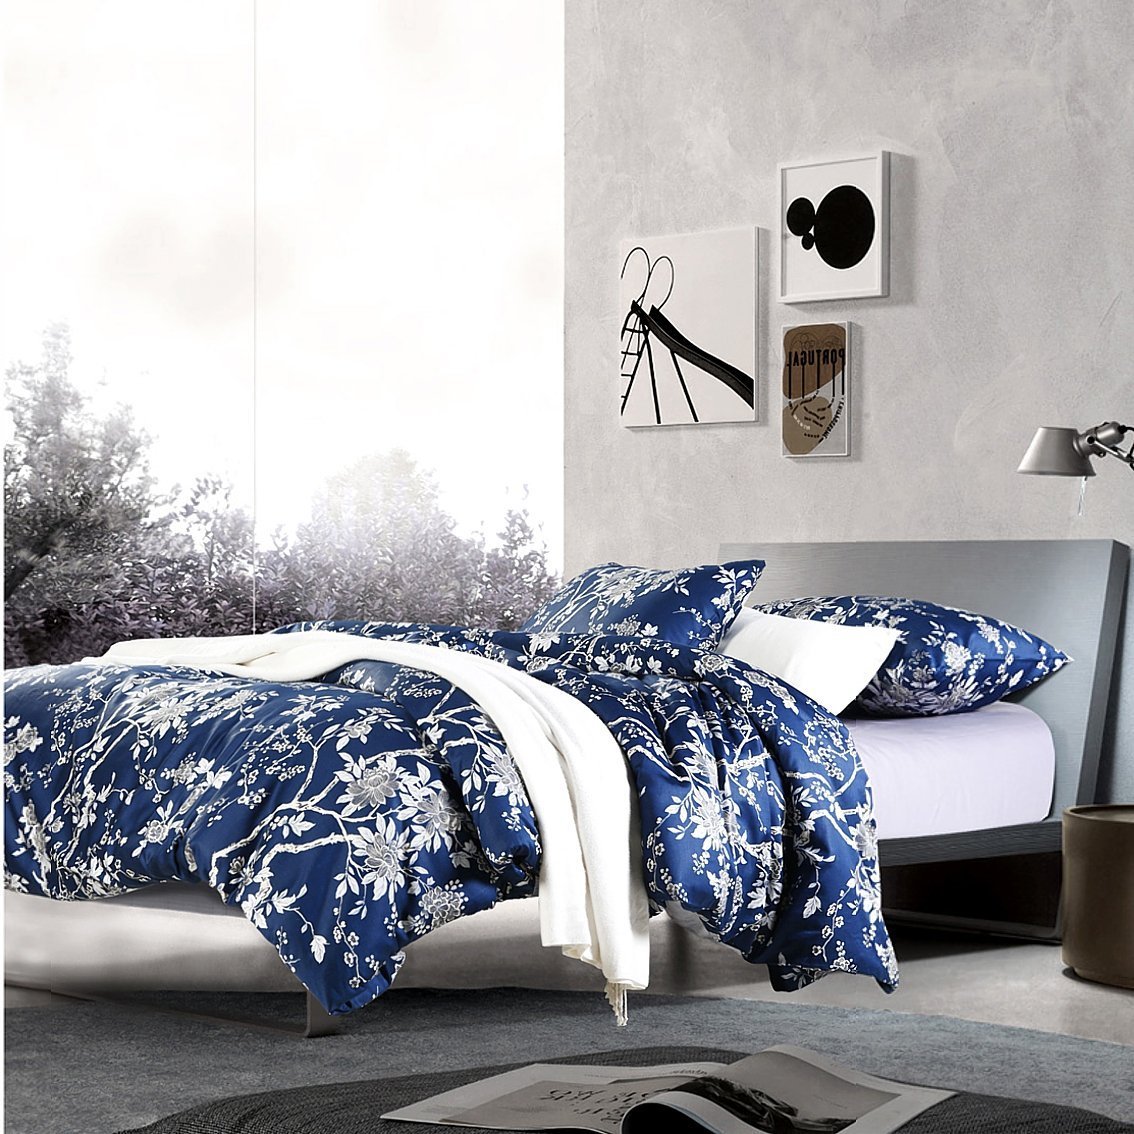 Eikei Eastern Floral Chinoiserie Blossom Print Duvet Quilt Cover Navy Blue Tan White Asian Style Botanical Tree Branches Ornamental Dr